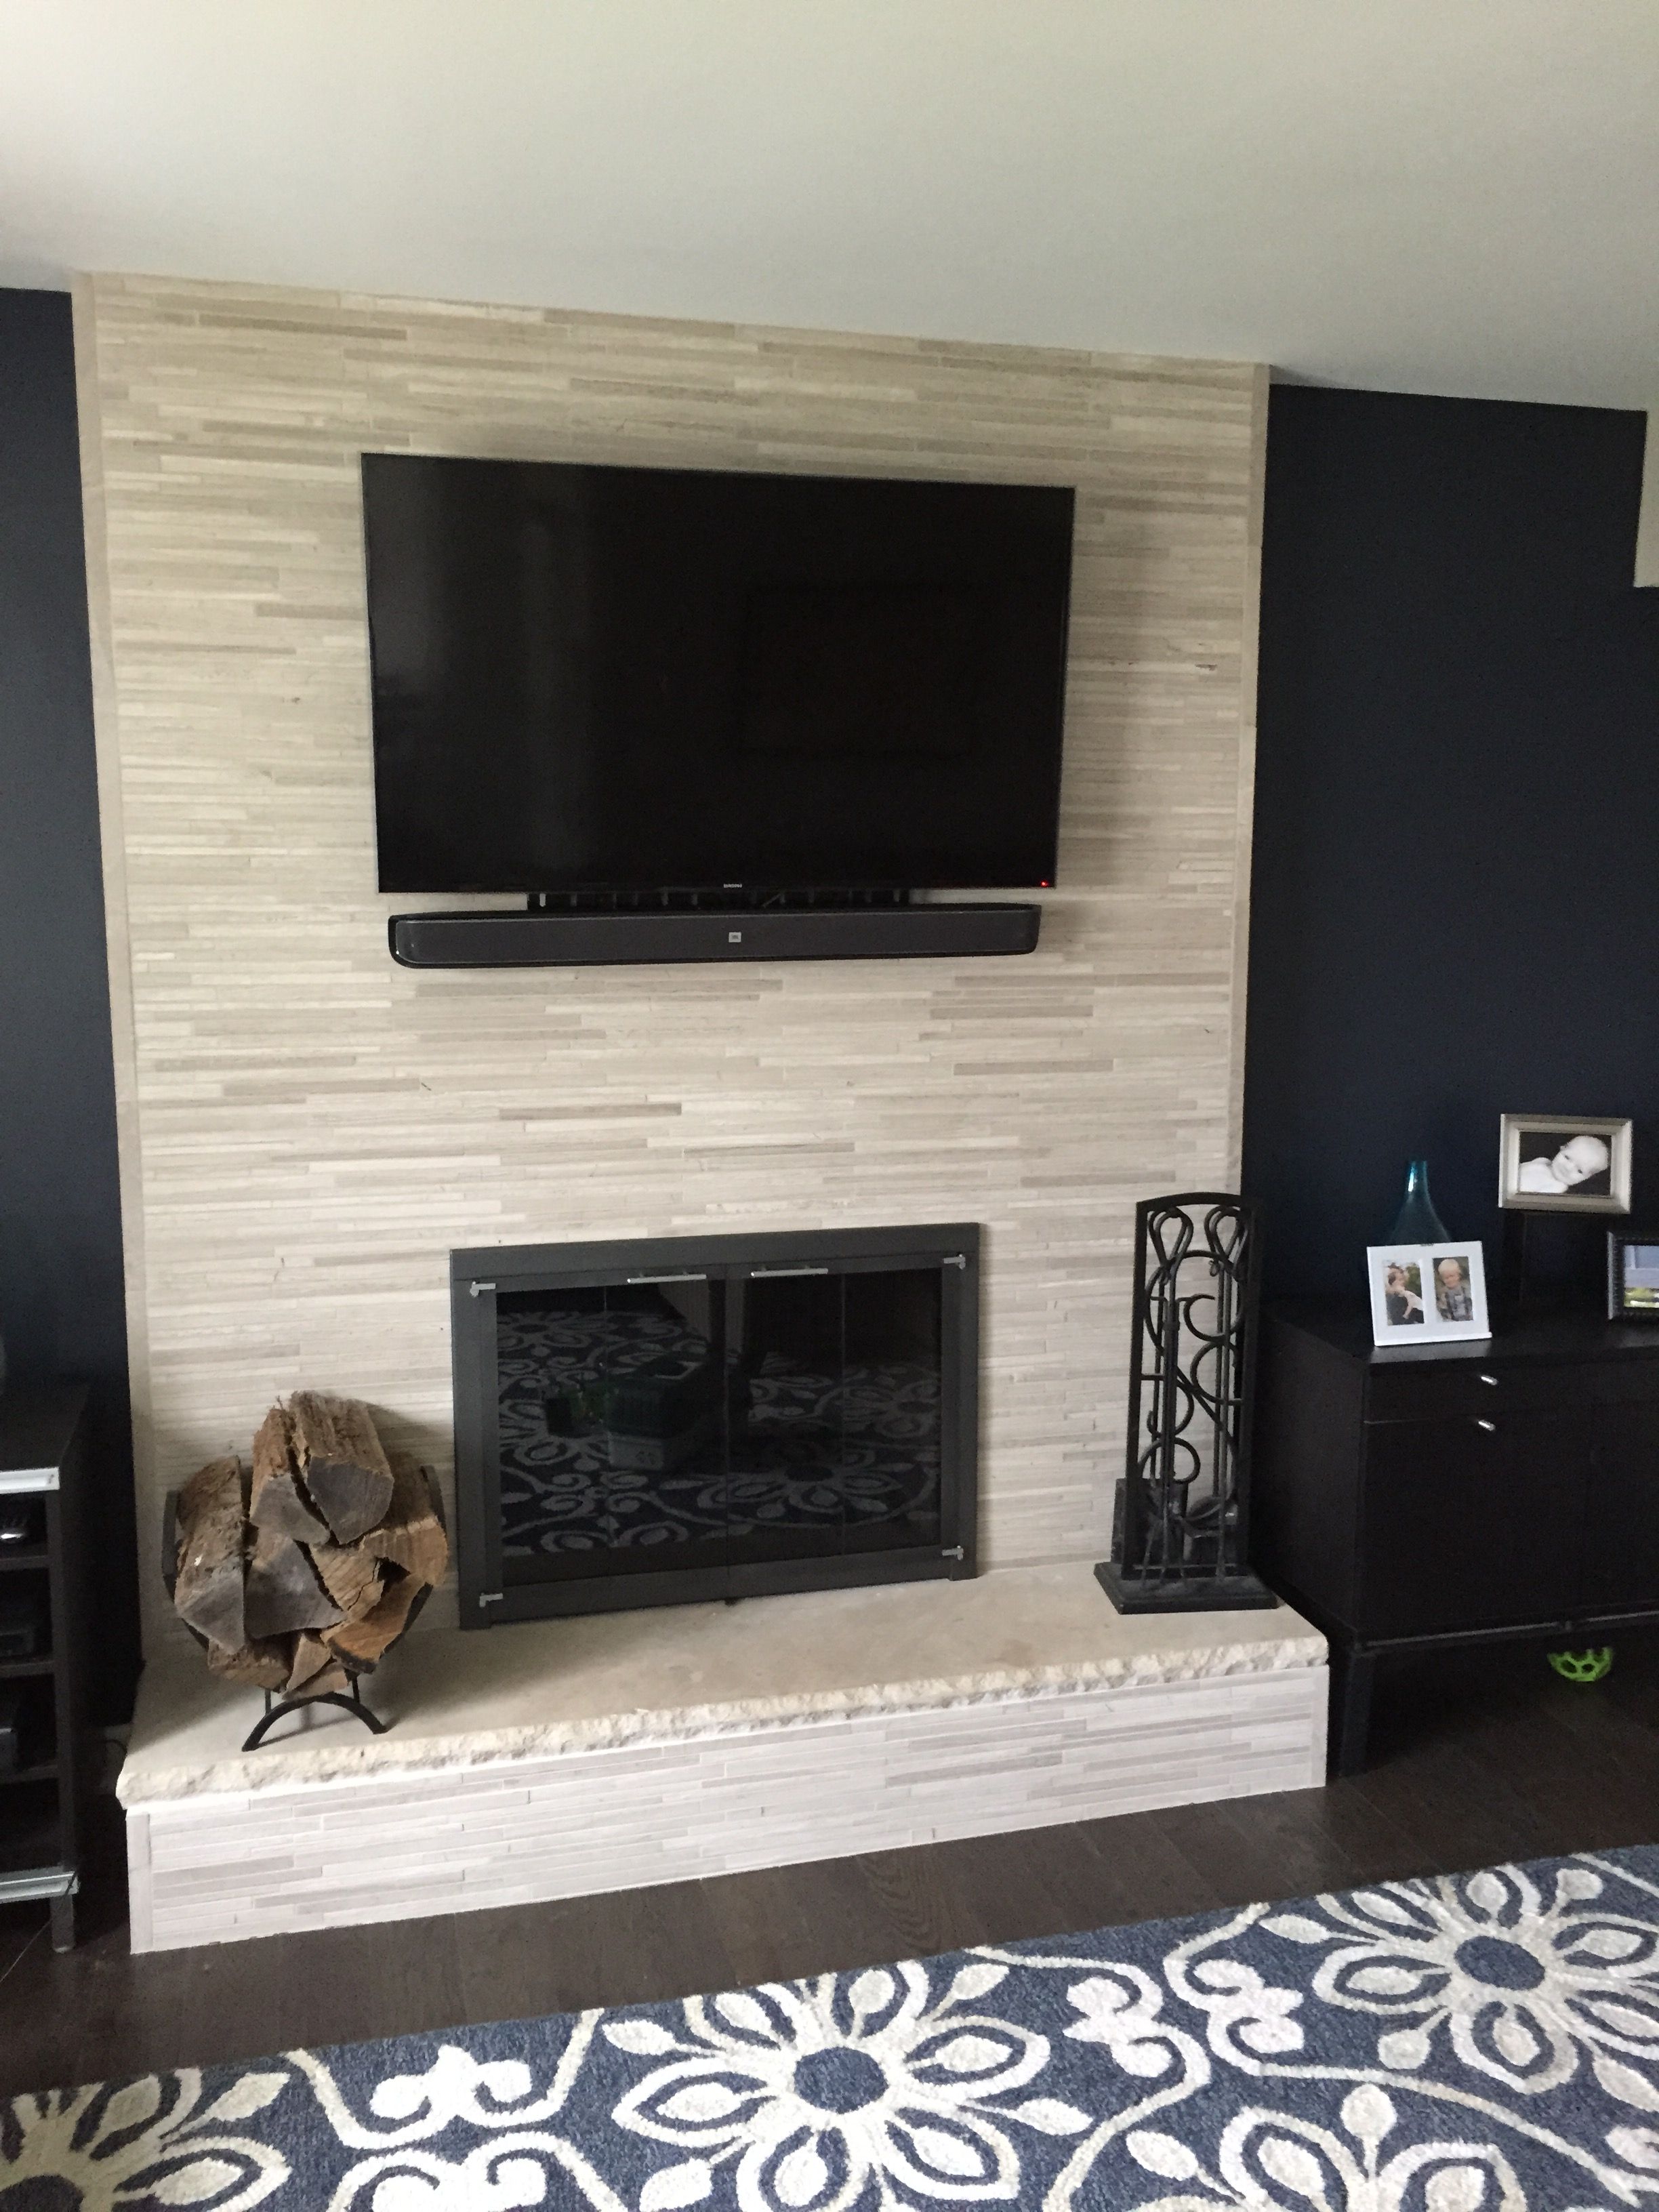 How to Mount Tv On Brick Fireplace Lovely Our Old Fireplace Was 80 S 90 S Brick Veneer to Give It An